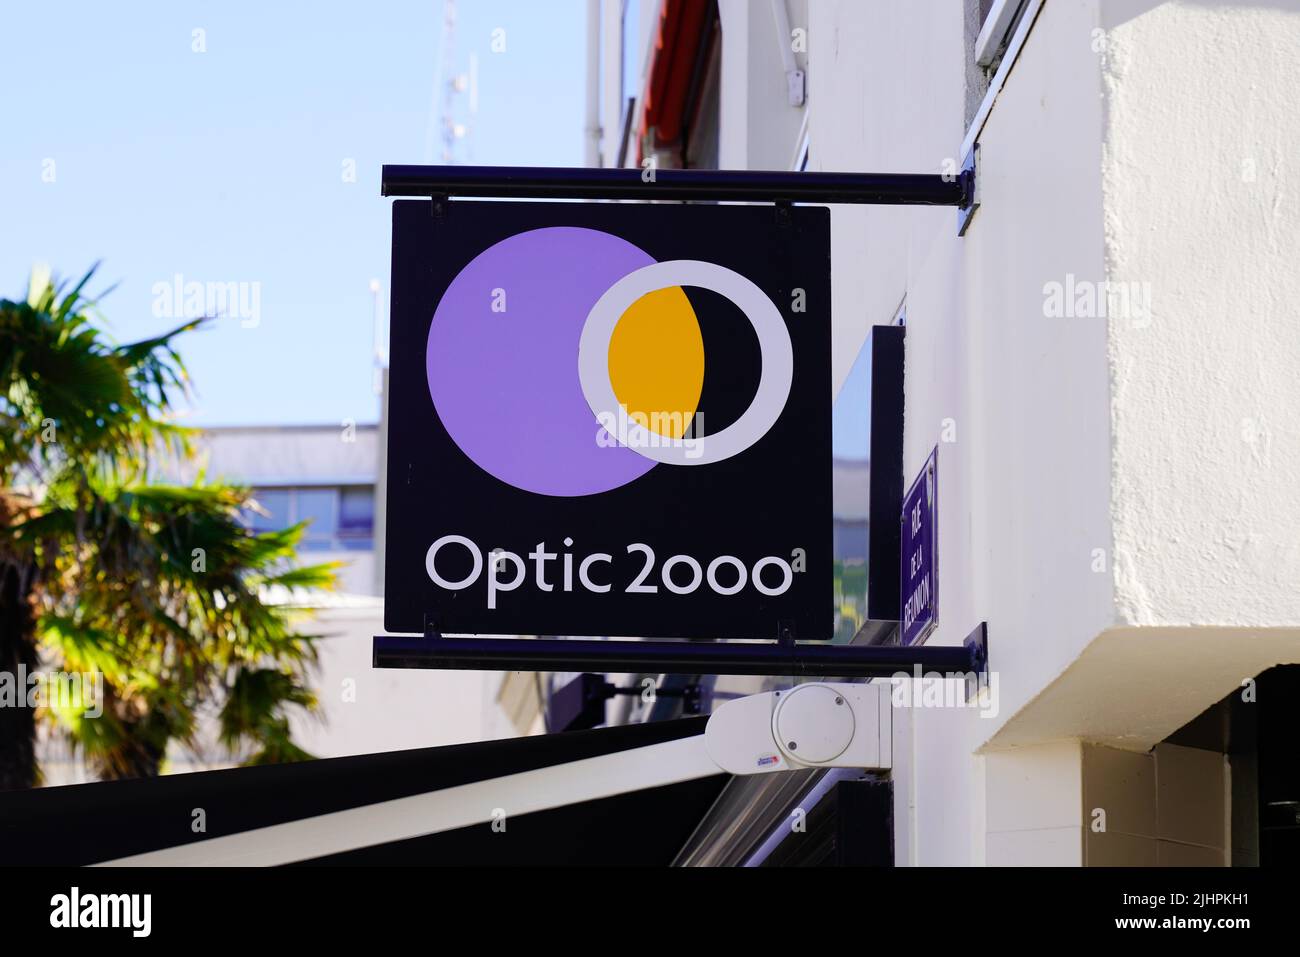 Bordeaux , Aquitaine  France - 07 04 2022 : optic 2000 logo text and sign brand facade french optic store retail optician medic shop Stock Photo